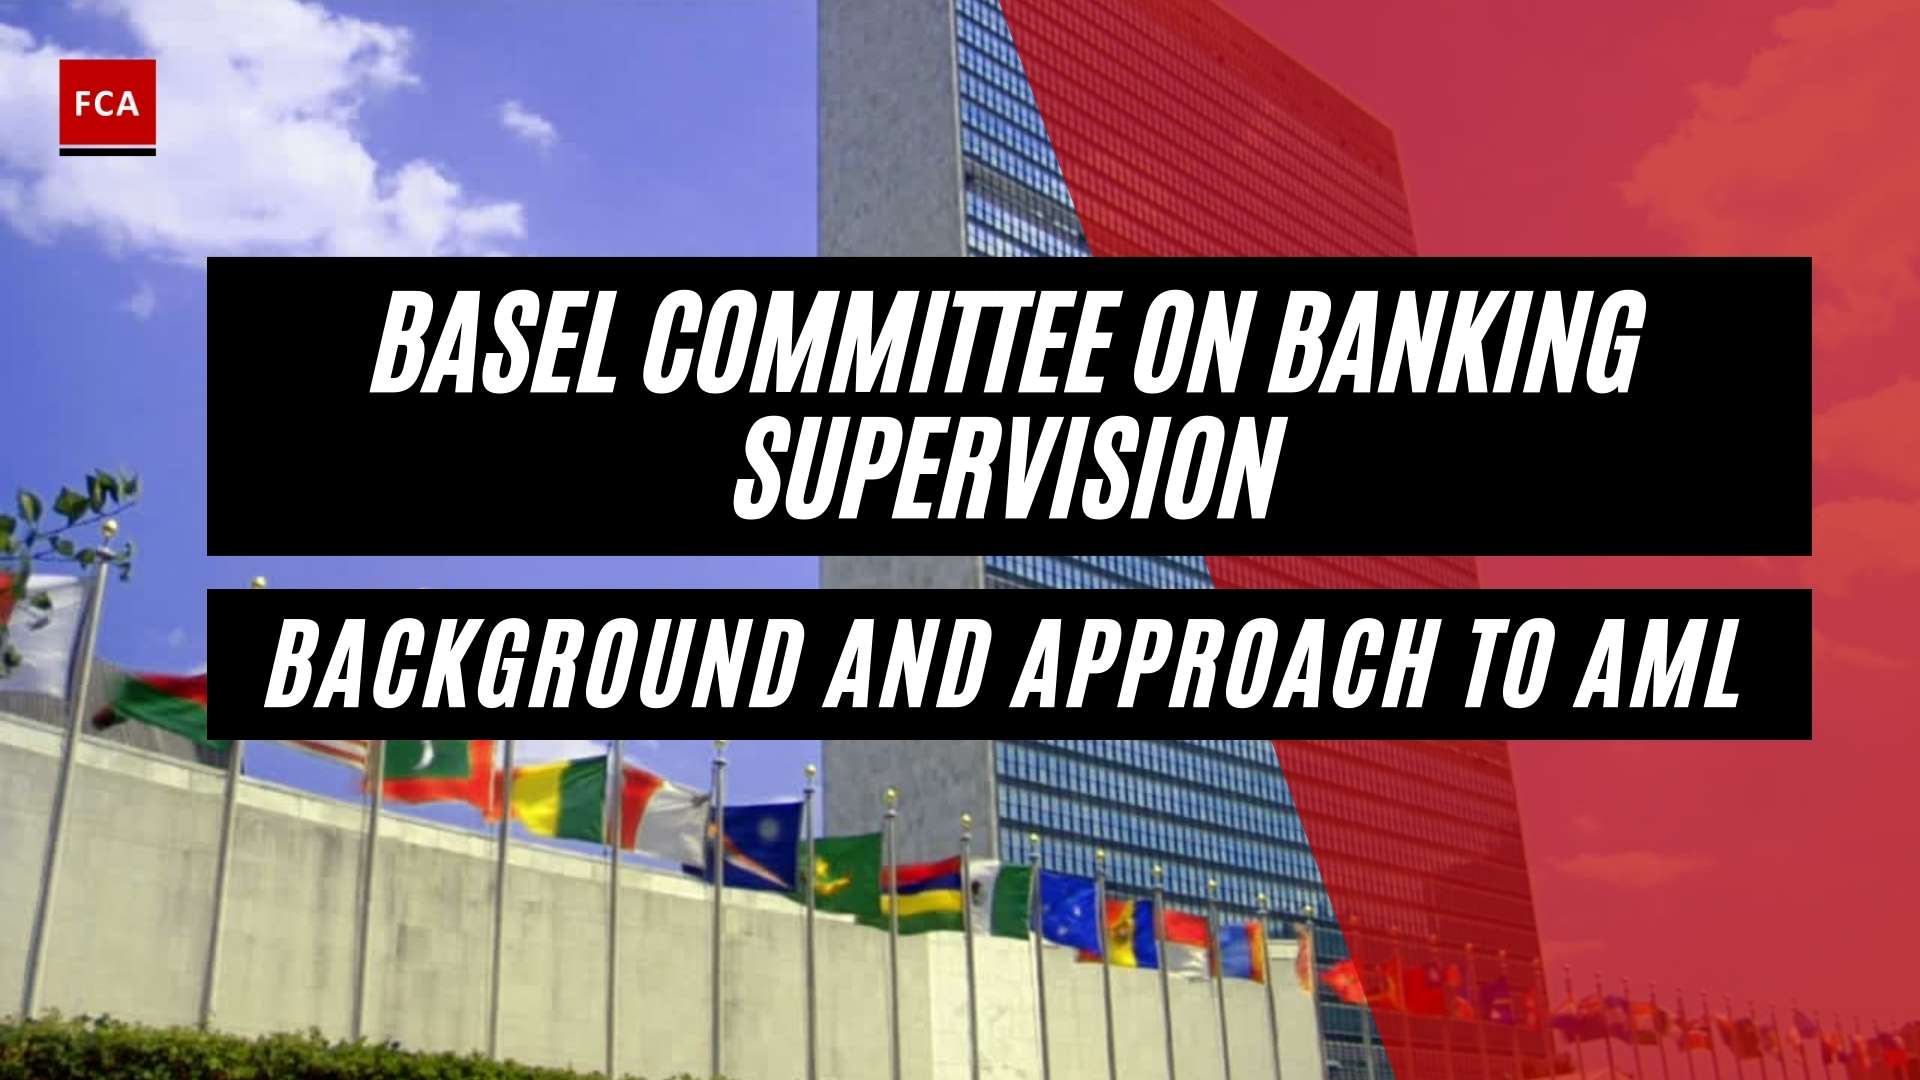 Important Background And Approach Of Basel Committee On Banking Supervision To Cdd And Kyc In 2020 - Featured Image